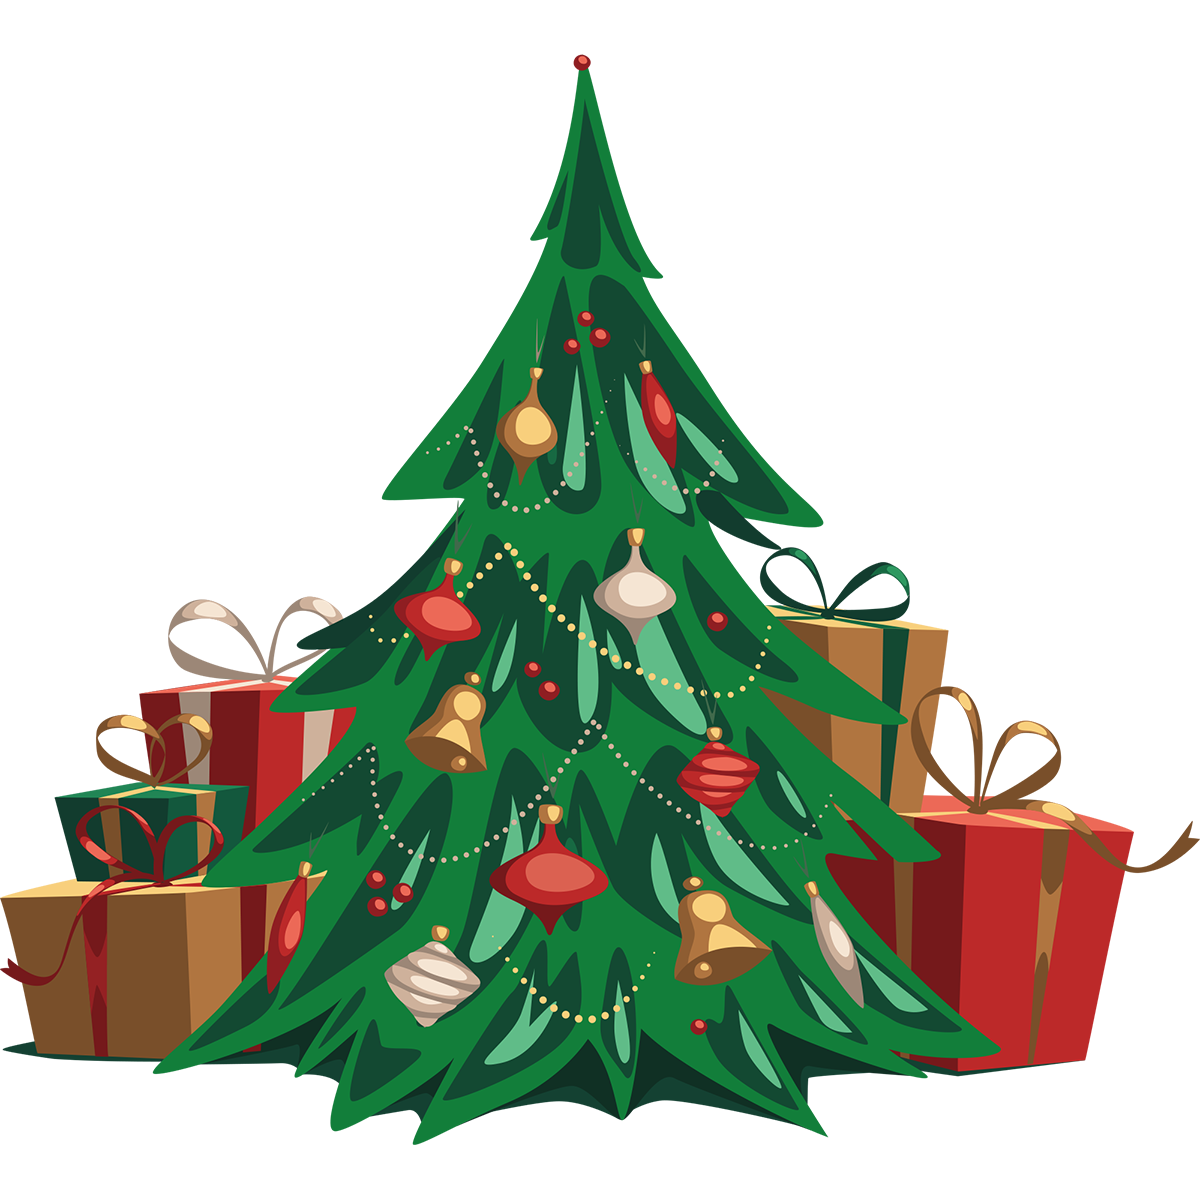 pngtreecute_christmas_tree_element_3687489.png